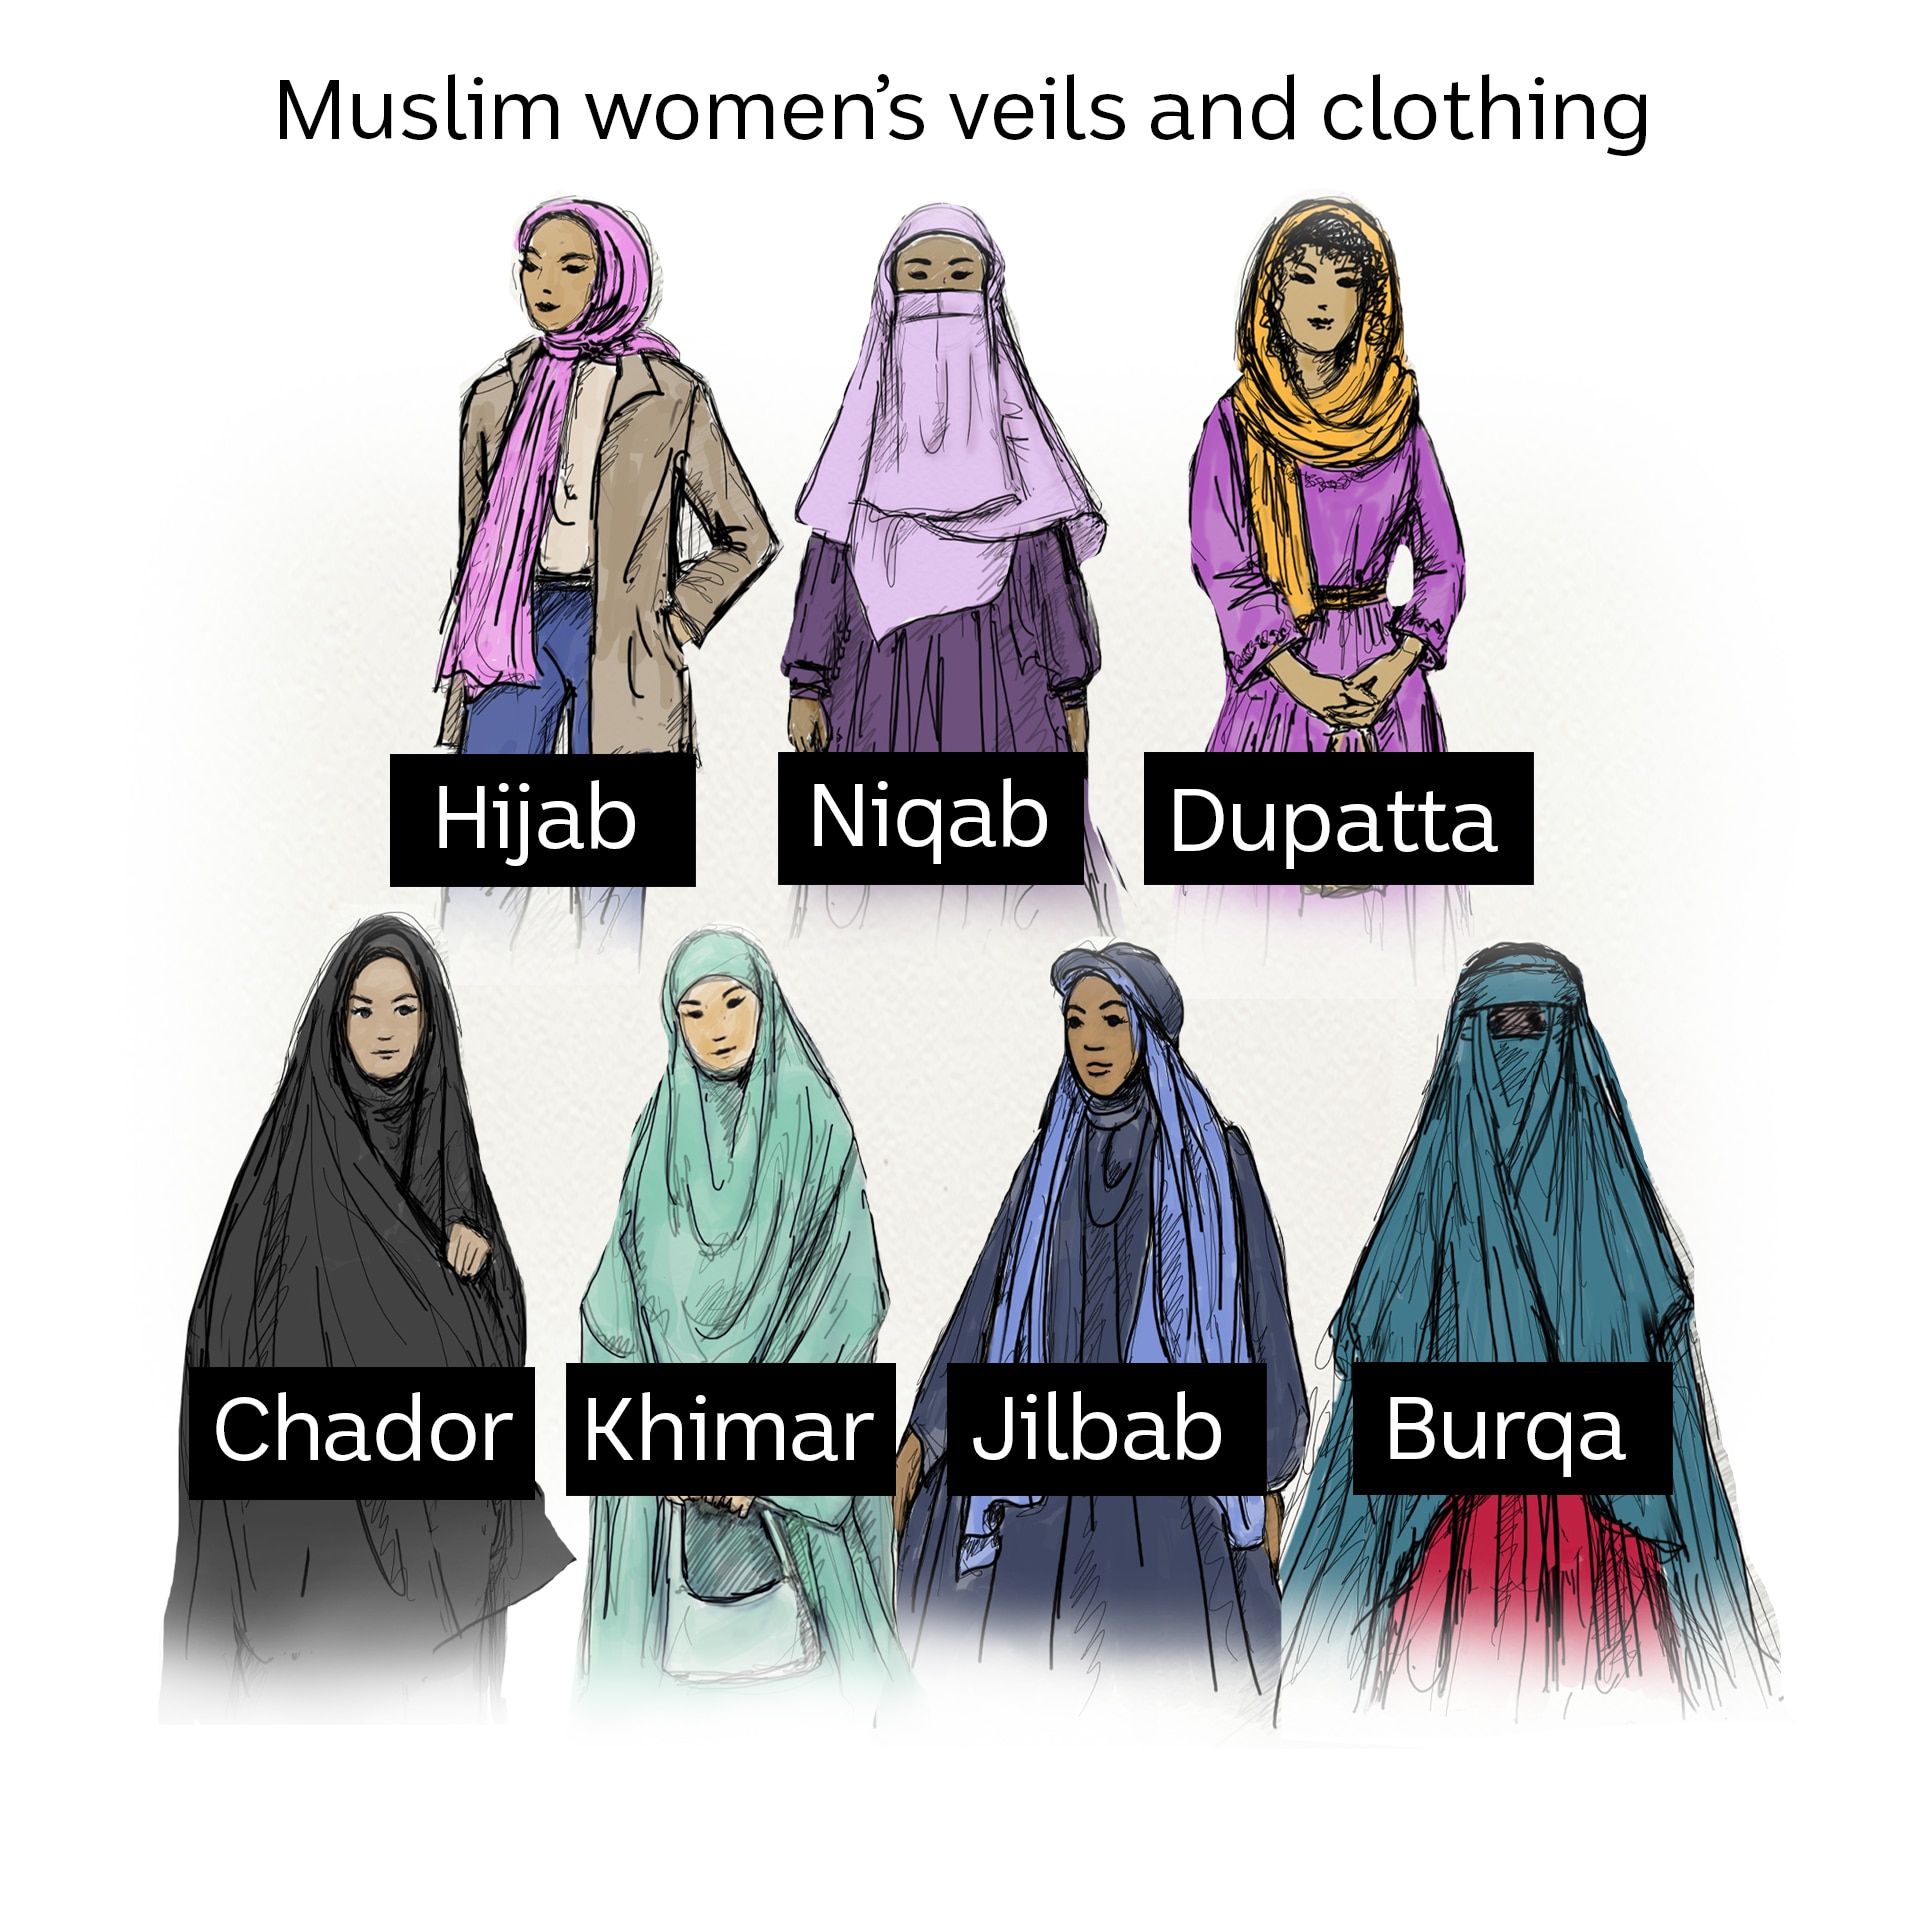 Hand-drawn illustrations. Seven women of various ethnicities wearing modest clothing, all with headscarves of different lengths